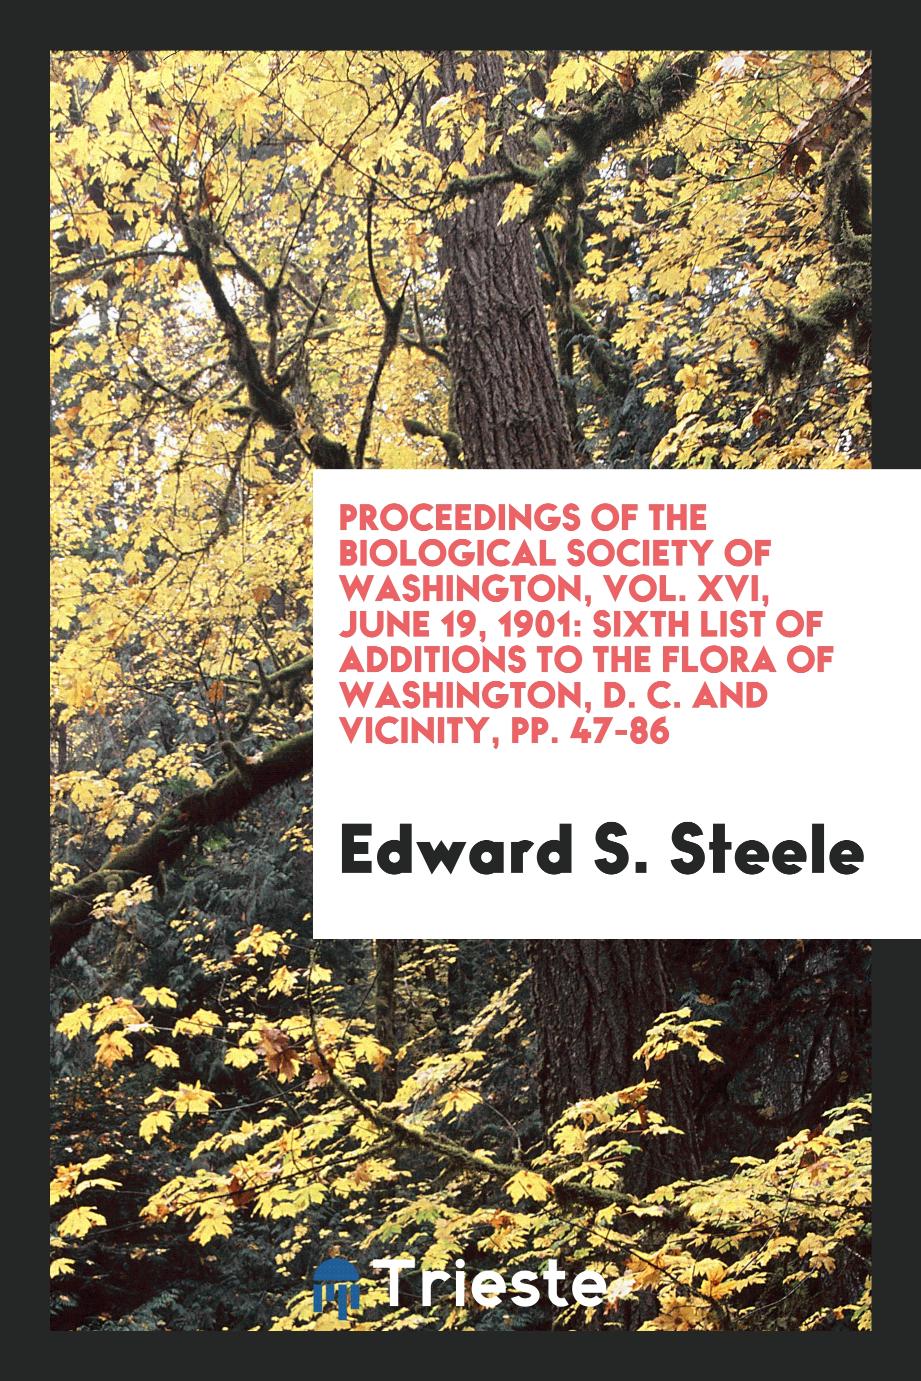 Proceedings of the biological society of Washington, Vol. XVI, June 19, 1901: Sixth list of additions to the flora of Washington, D. C. and vicinity, pp. 47-86